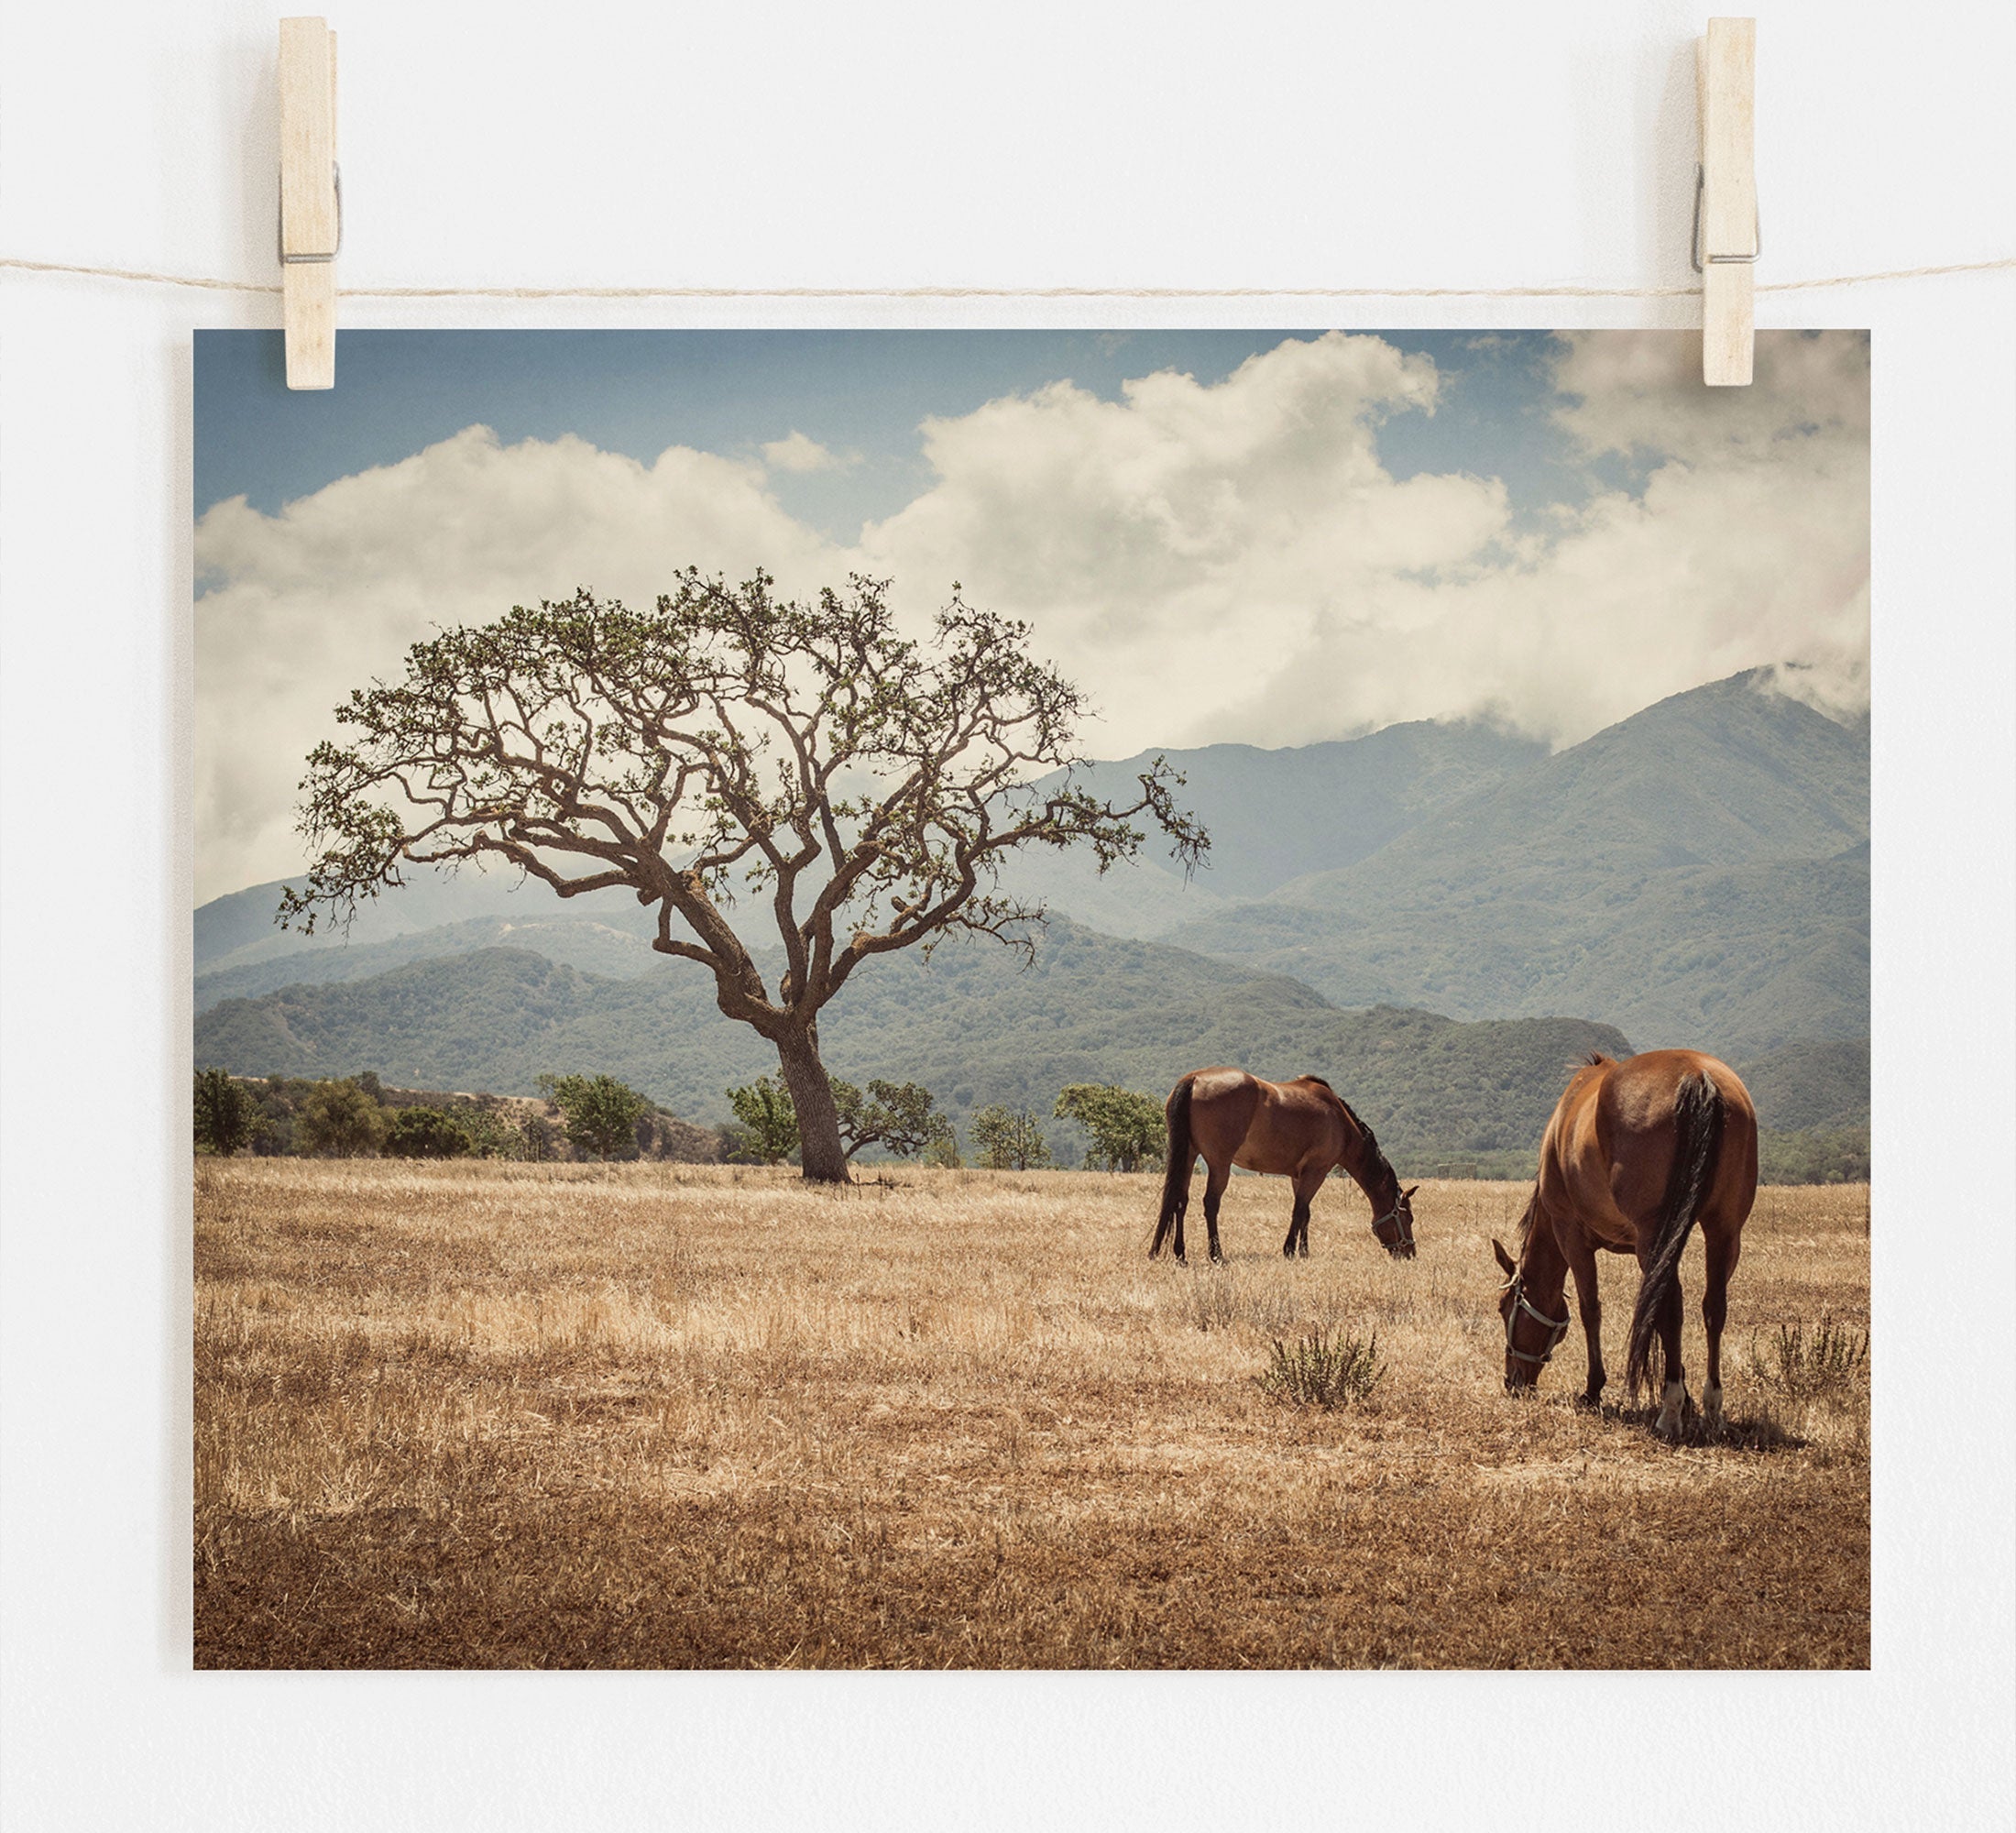 Two &#39;Santa Ynez Horses&#39; graze in a sunlit field near a lone tree in the Santa Ynez Valley, with mountains and clouds in the background, depicted as a photograph hung by clothespins.